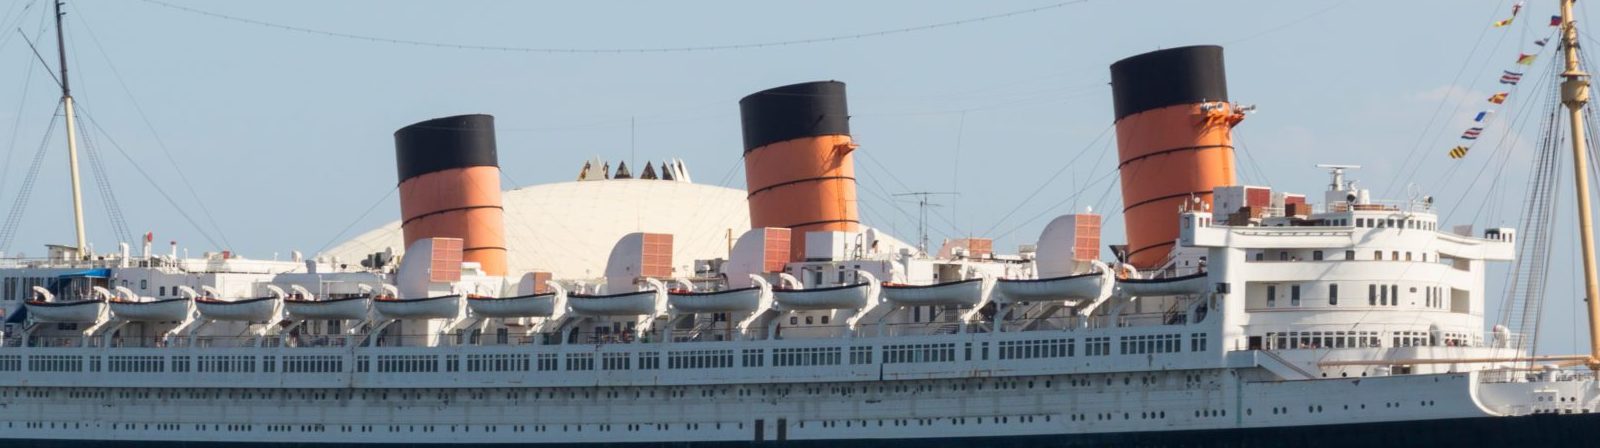 Queen Mary 2016 08 03